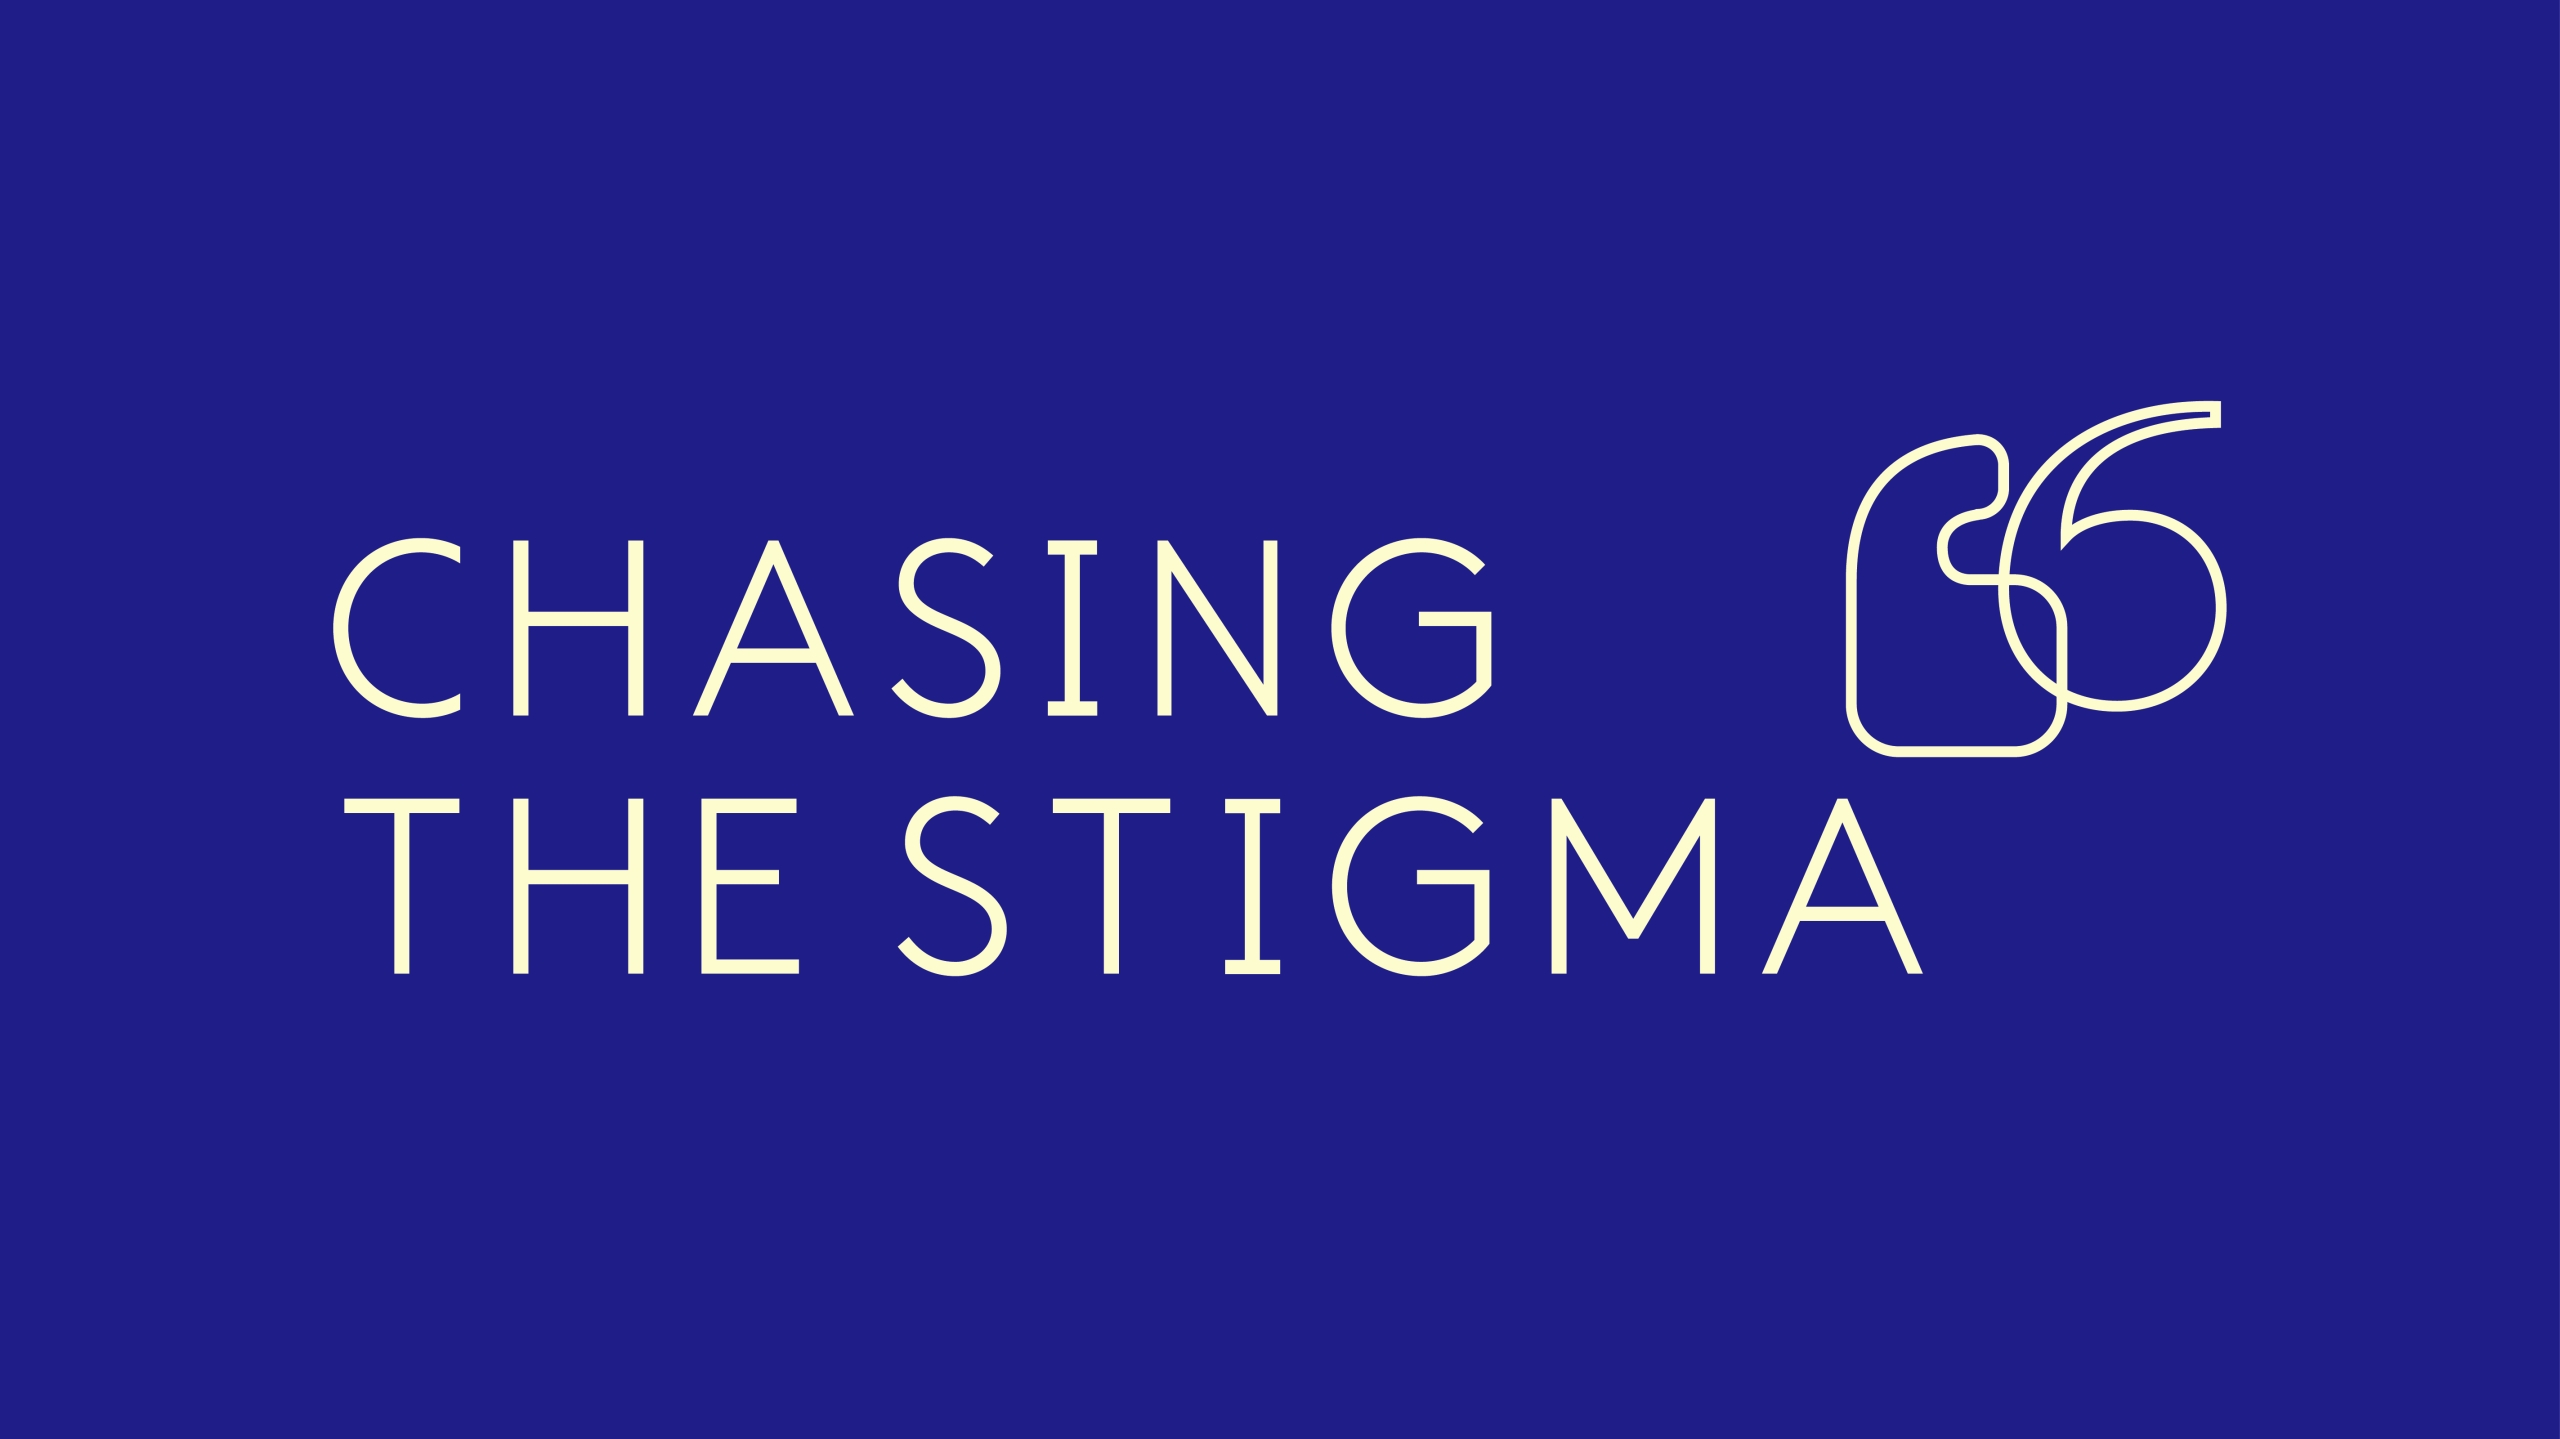 chasing the stigma wording in white on a blue background